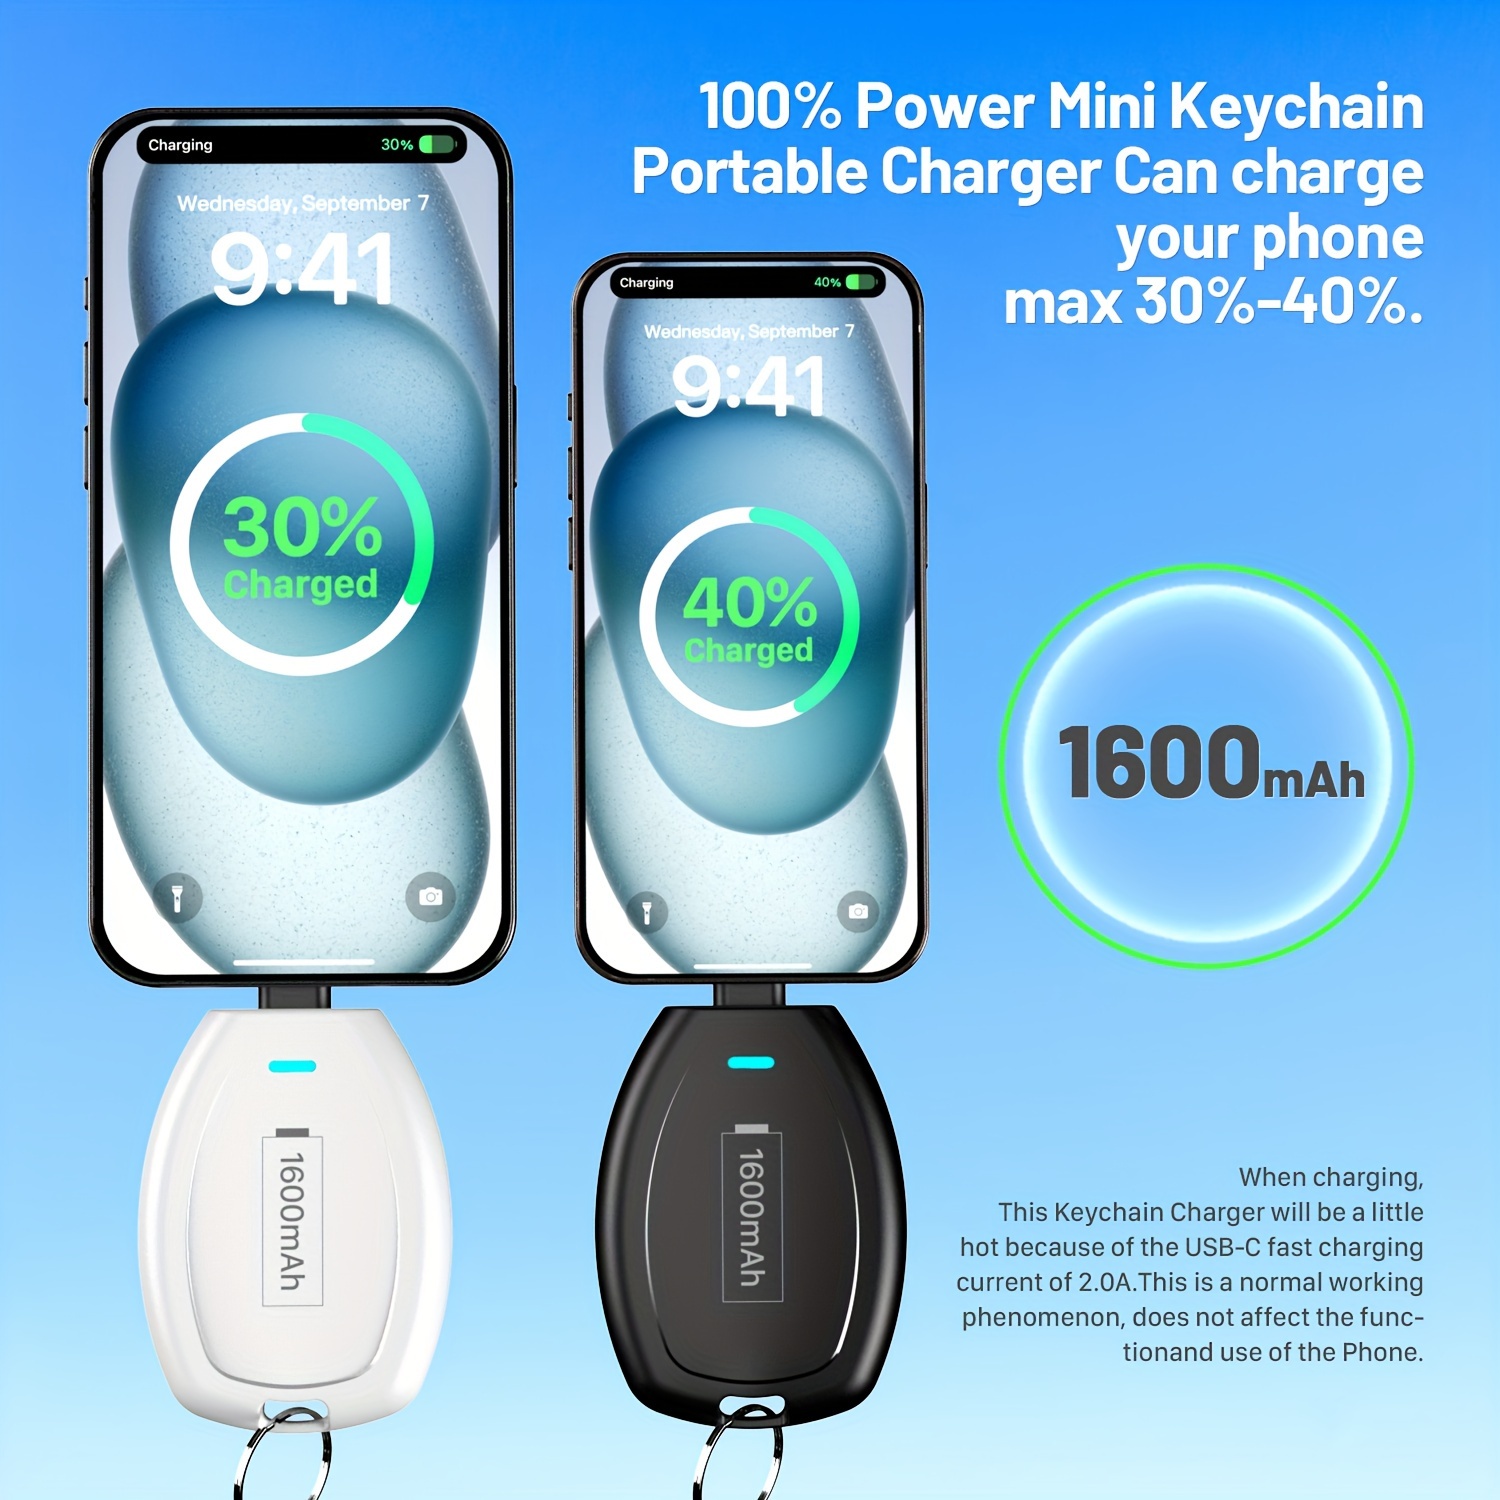 

2 Pcs Keychain Portable Charger, 1600mah Mini Power Emergency Pod Ultra-compact External Power Bank Battery Pack, Key Ring Cell Phone Charger For Iphone 6 7 8 X Xs 11 Pro Max 12 14 Airpods